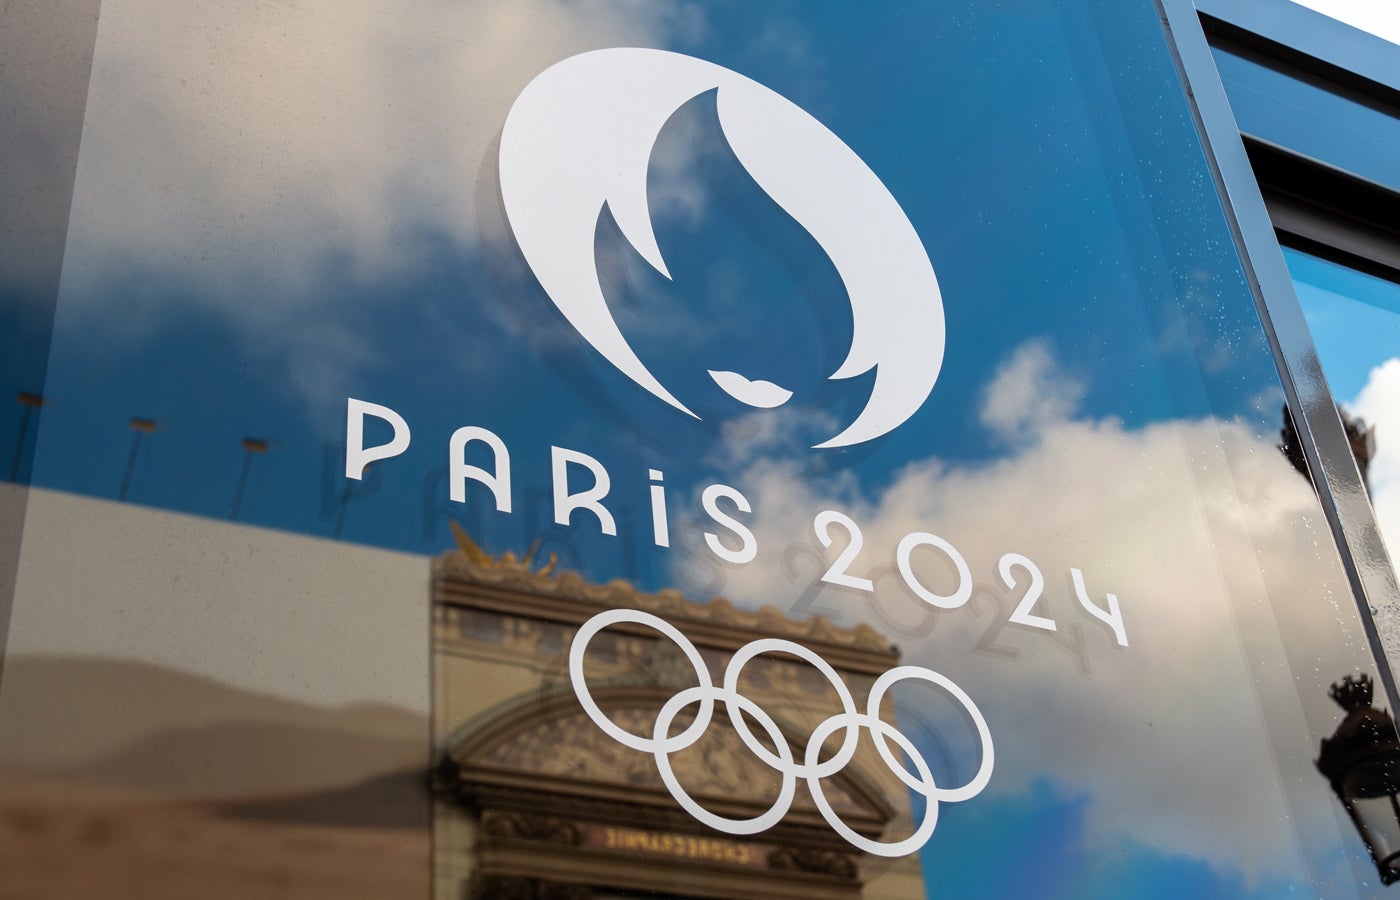 tr_20240604-cyber-attackers-target-paris-olympic-games.jpg